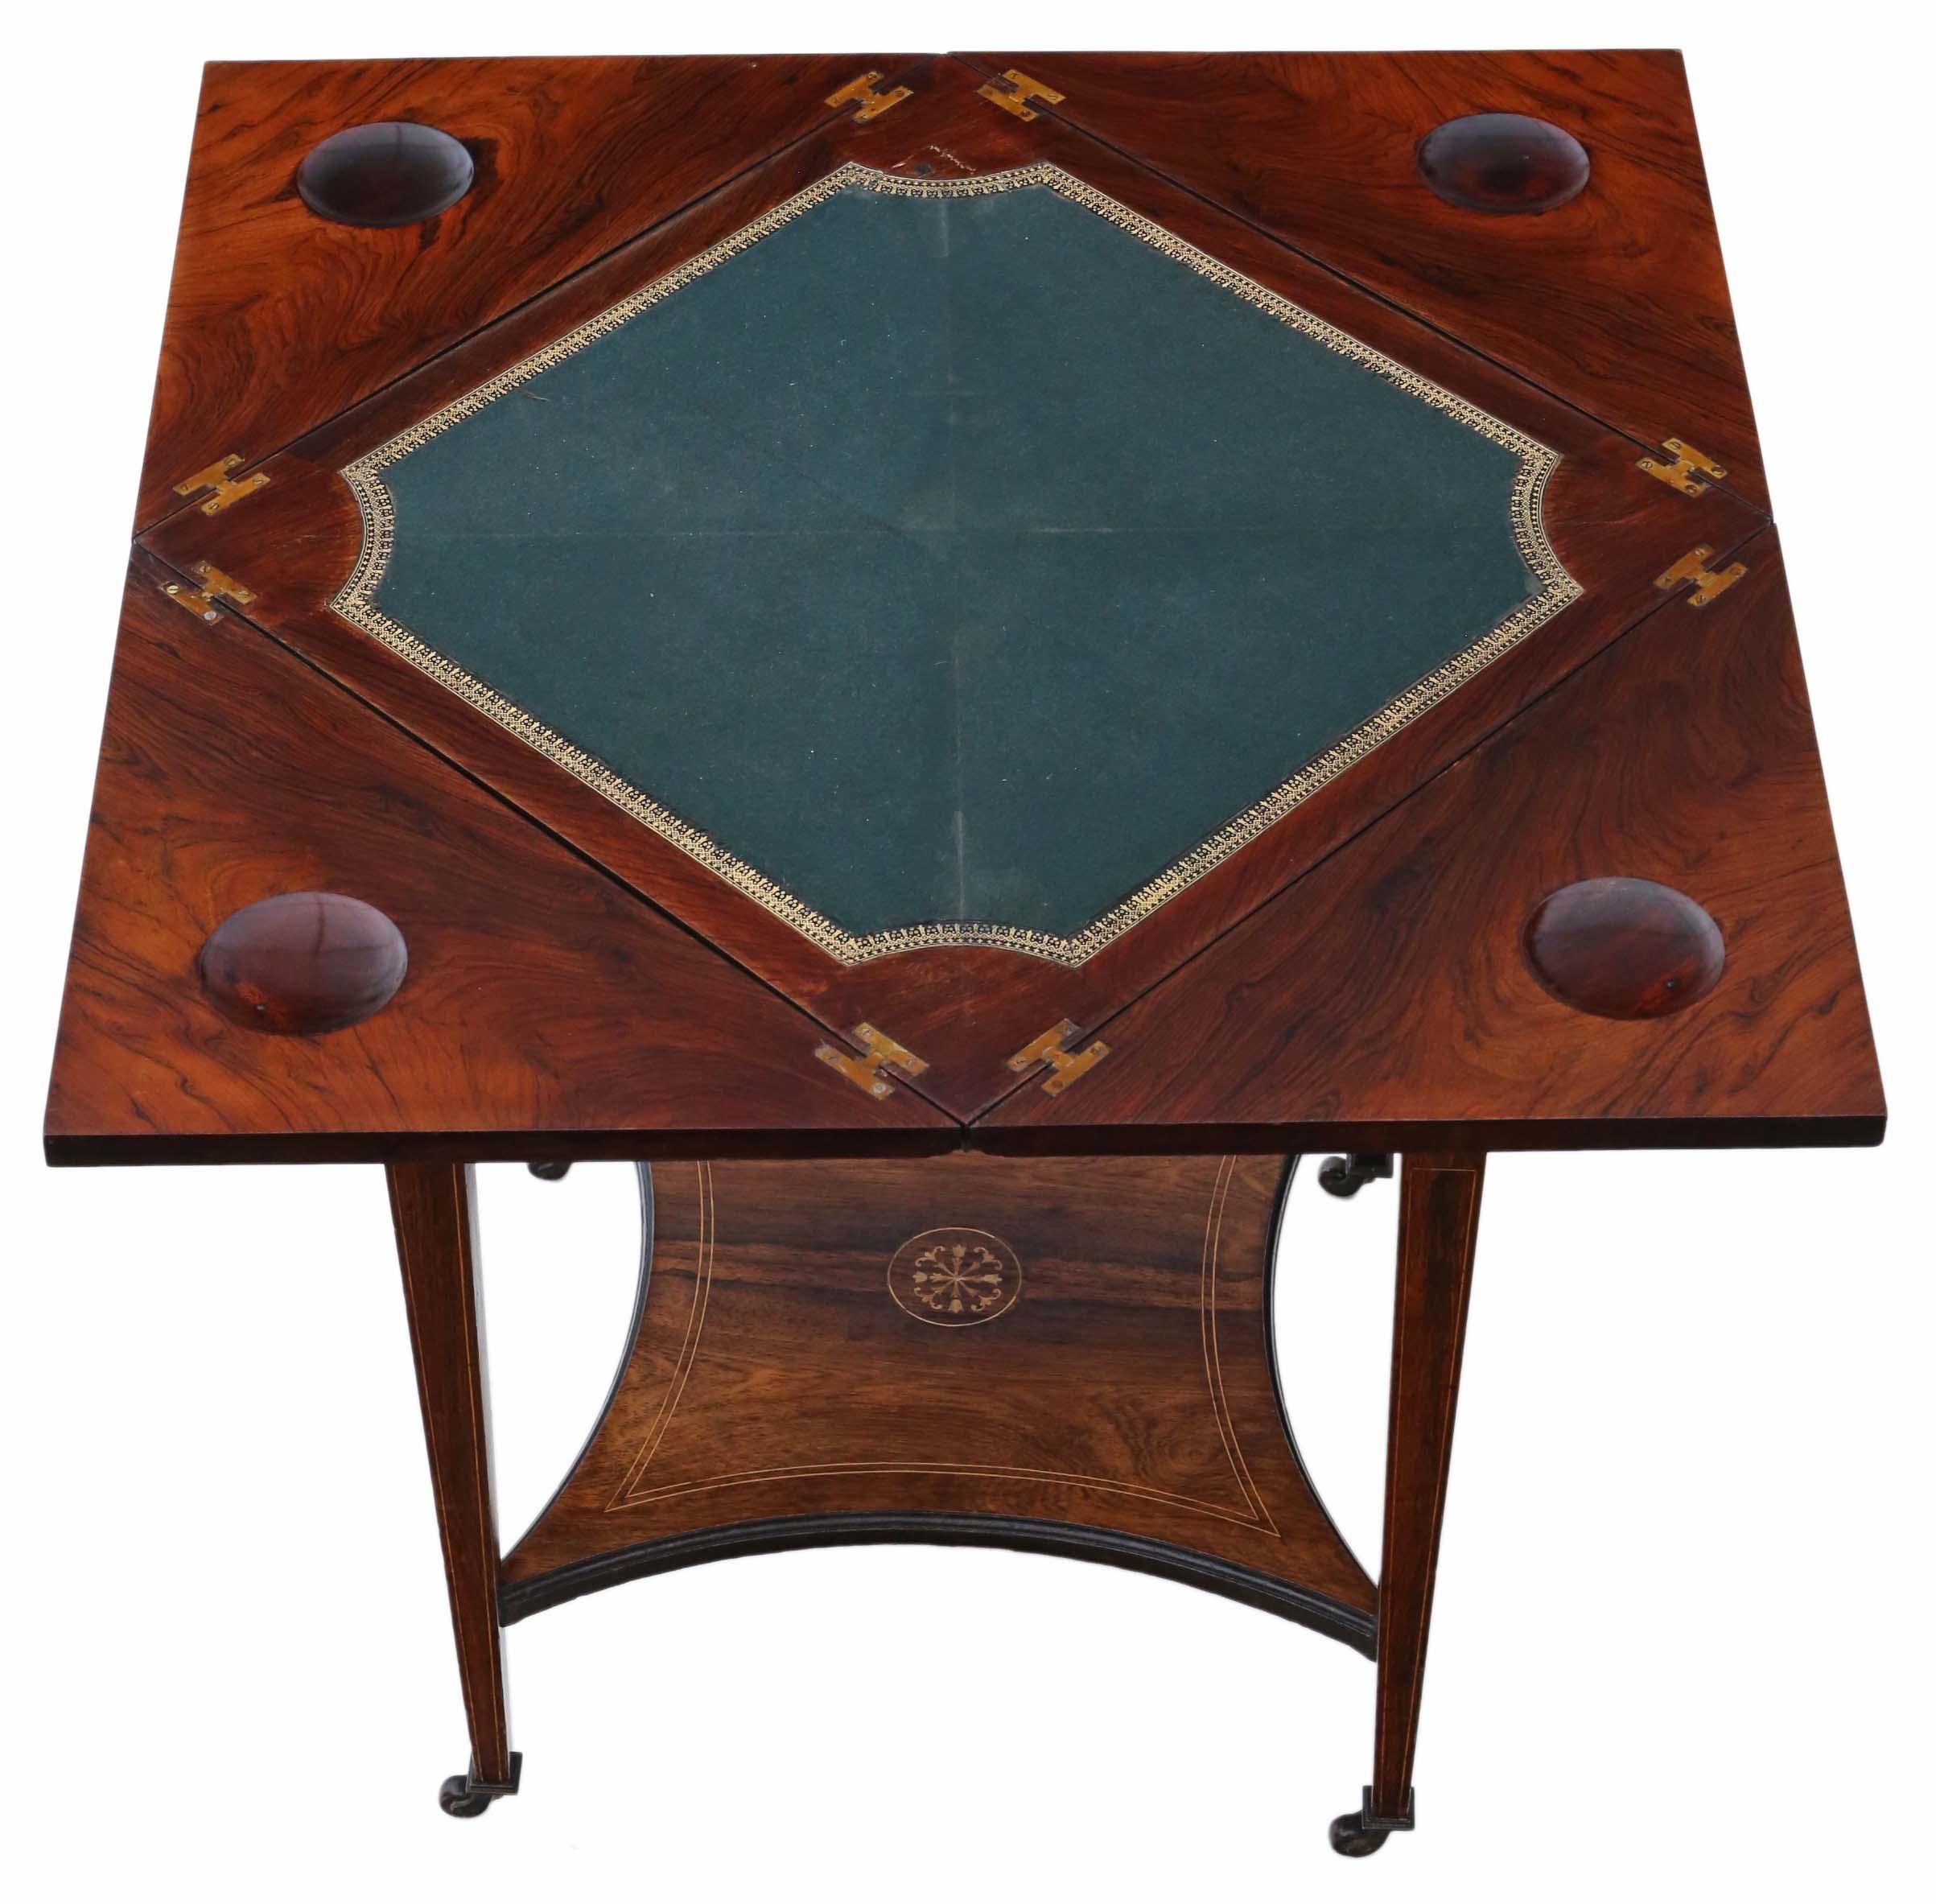 Late 19th Century Victorian Inlaid Rosewood Games Table